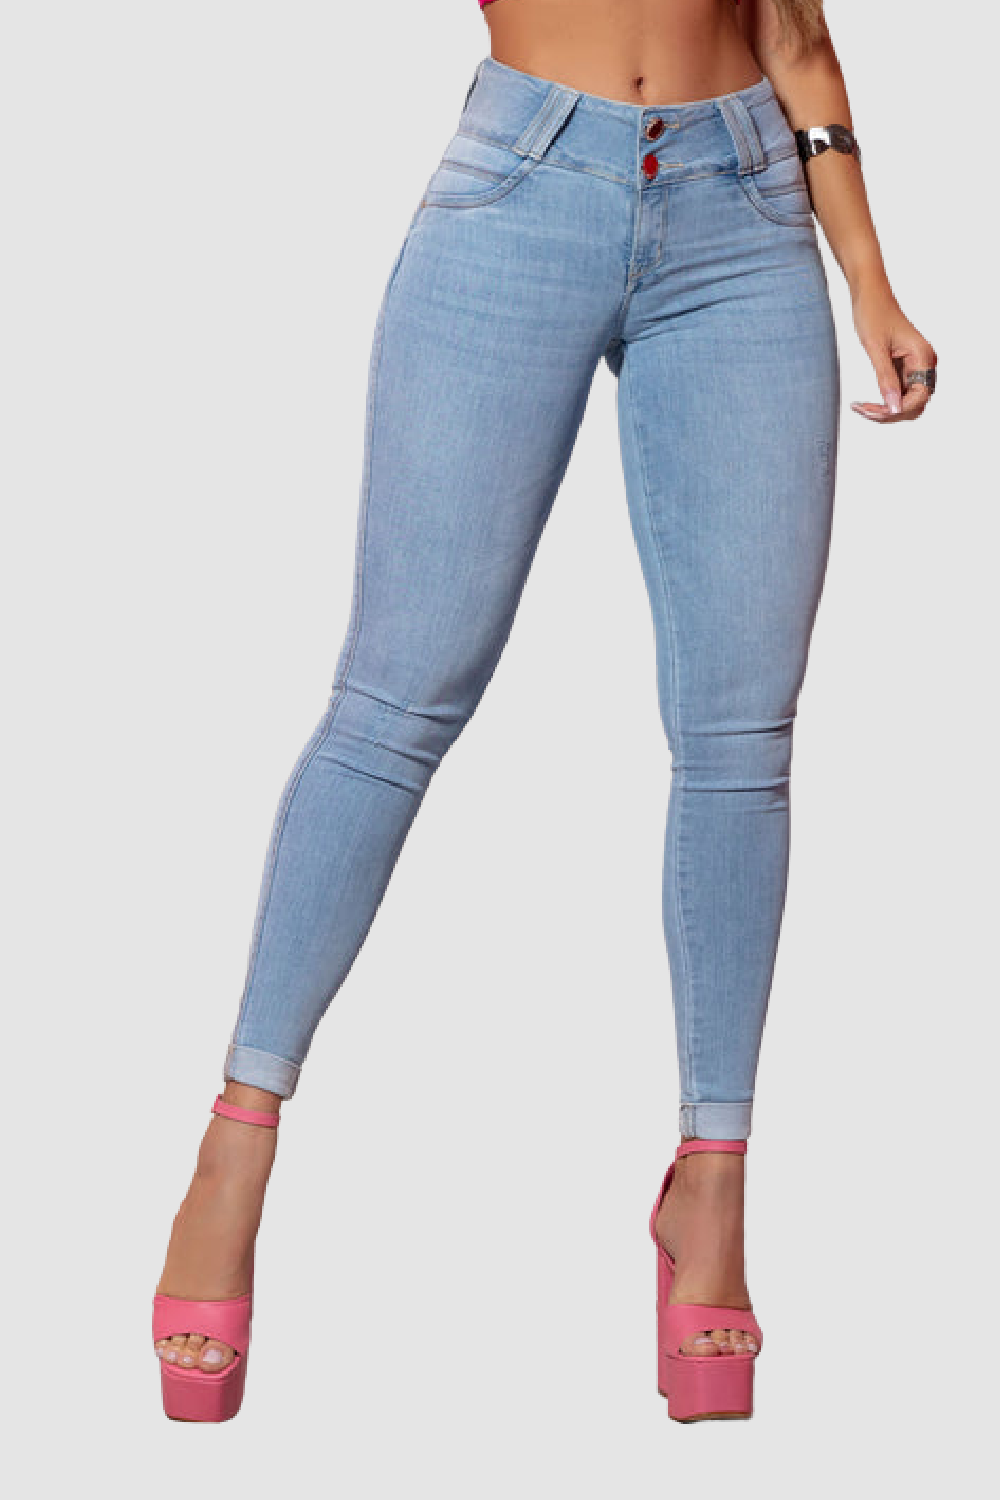 Jeans URock Skinny Light Wash Couture –